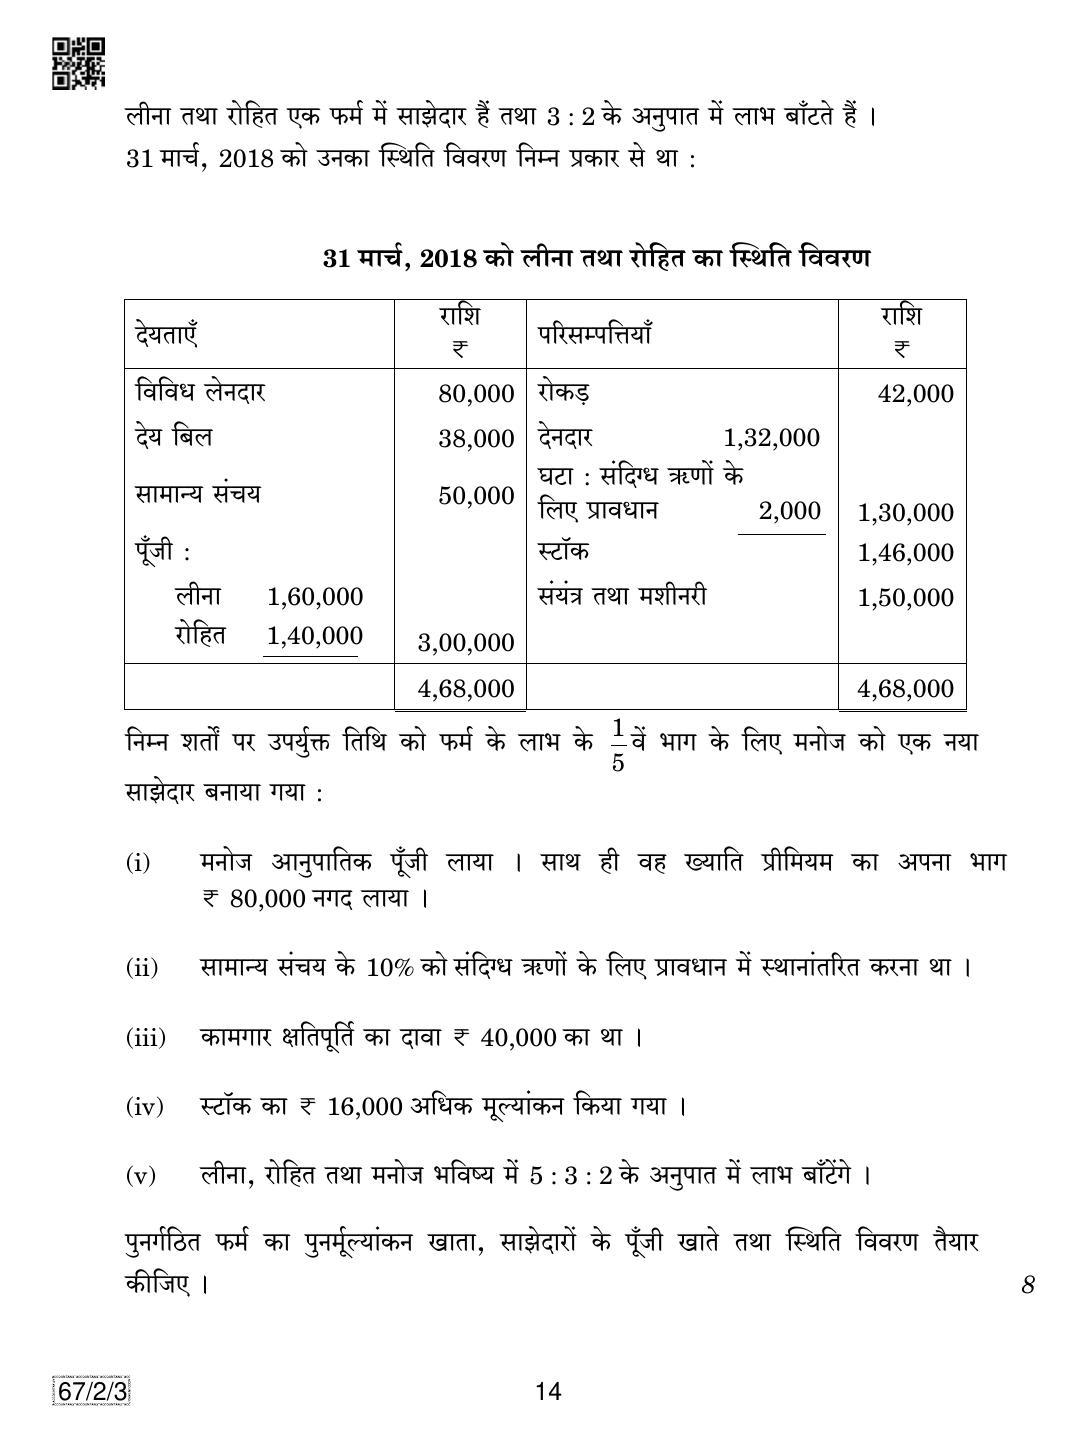 CBSE Class 12 67-2-3 Accountancy 2019 Question Paper - Page 14